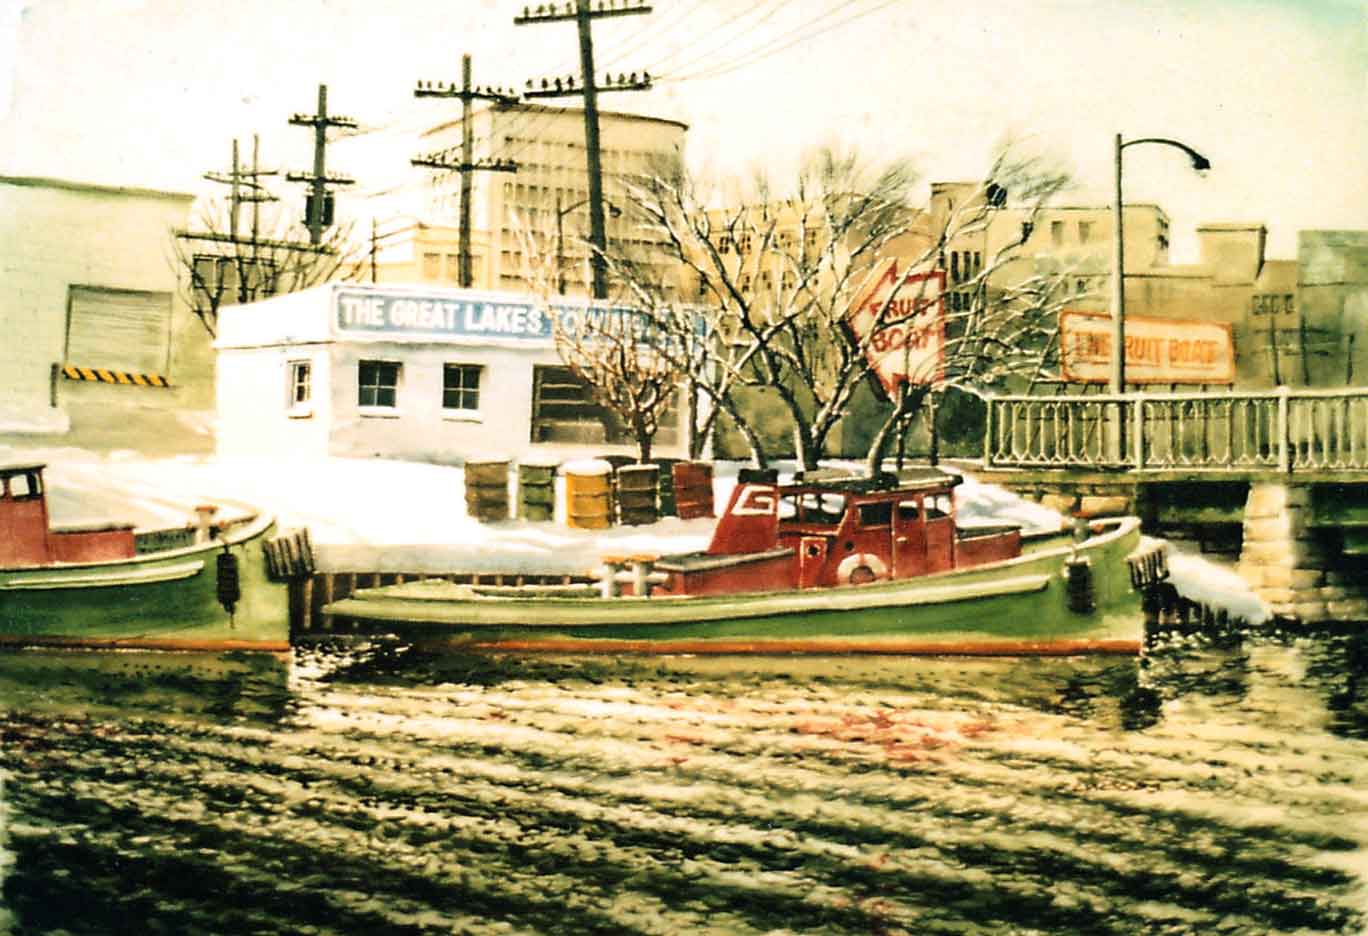 Great Lakes Towing Co., Watercolor on paper, 28 x 21